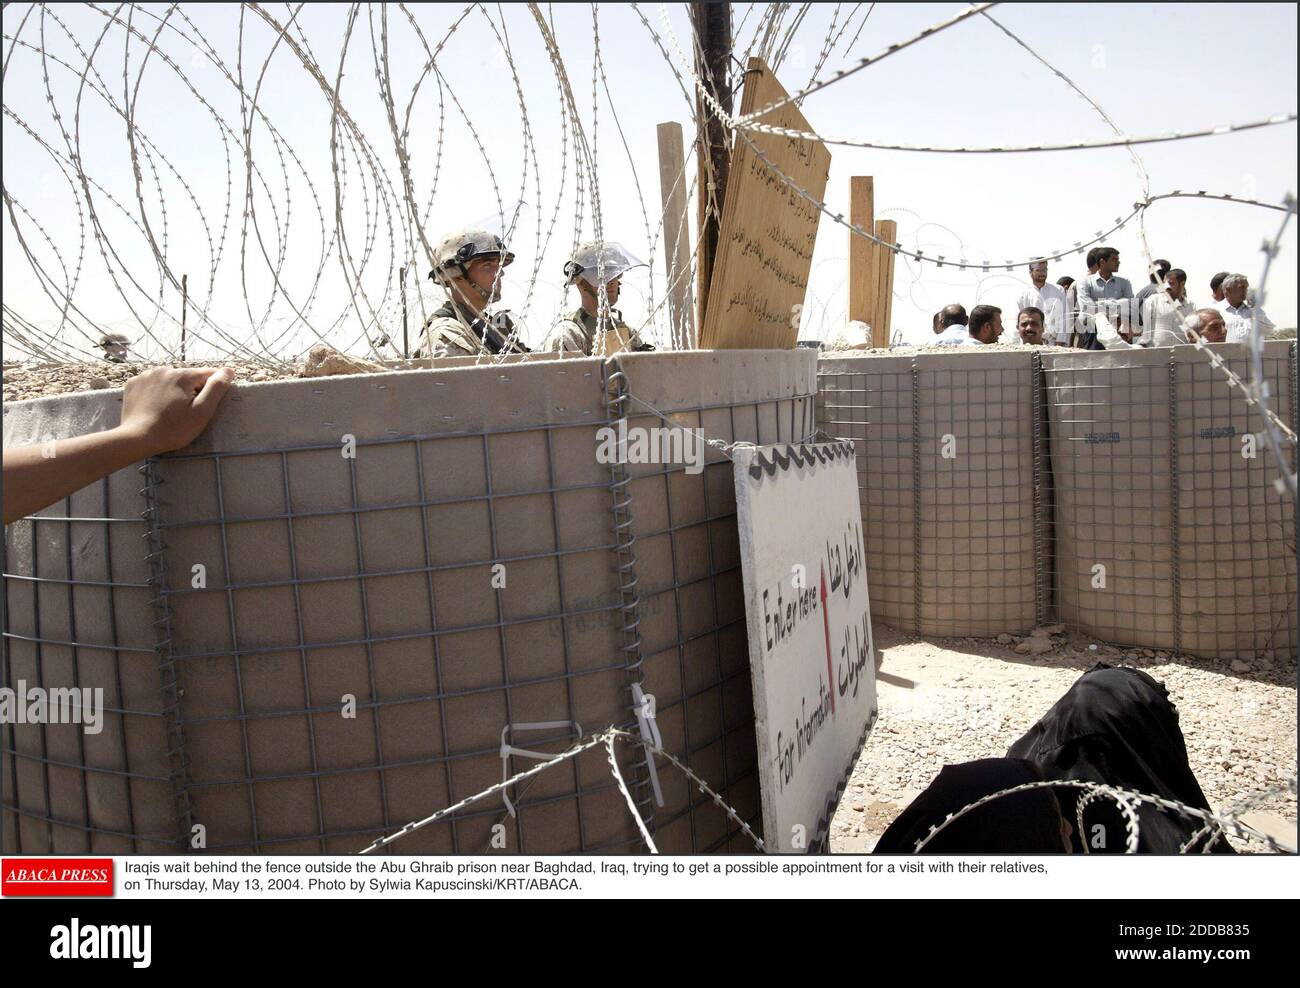 NO FILM, NO VIDEO, NO TV, NO DOCUMENTARY - Iraqis wait behind the fence outside the Abu Ghraib prison near Baghdad, Iraq, trying to get a possible appointment for a visit with their relatives, on Thursday, May 13, 2004. Photo by Sylwia Kapuscinski/KRT/ABACA. Stock Photo